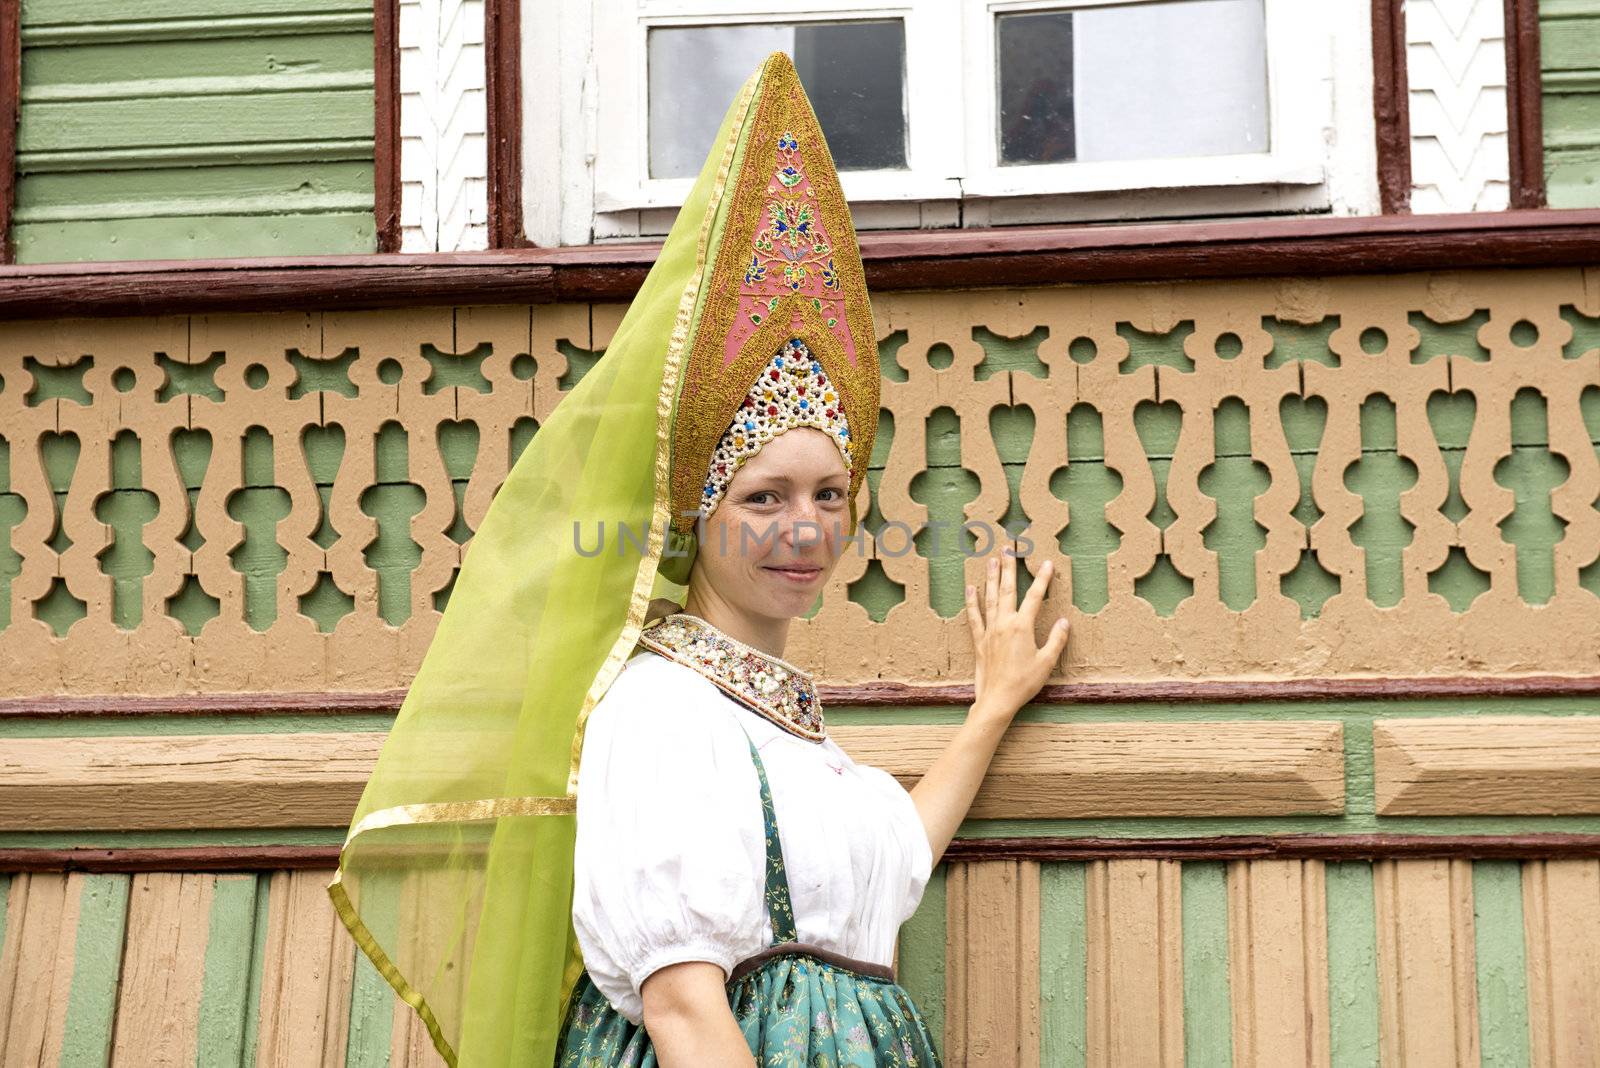 The young girl in traditional to Russian clothes. Taken in Myshkin village, Russia on July 2012.